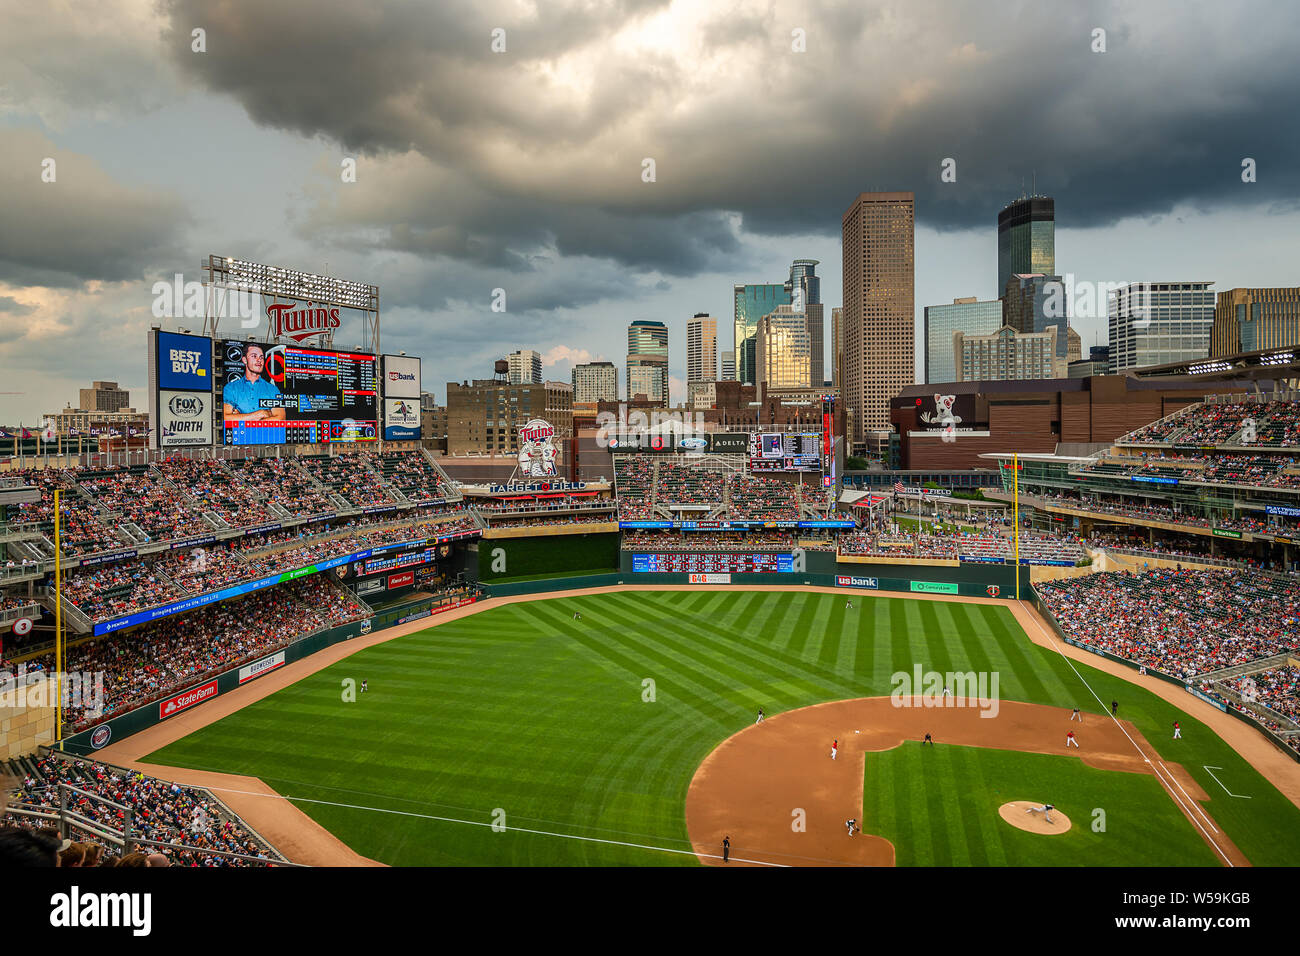 Thunderstorm over target field stock photo